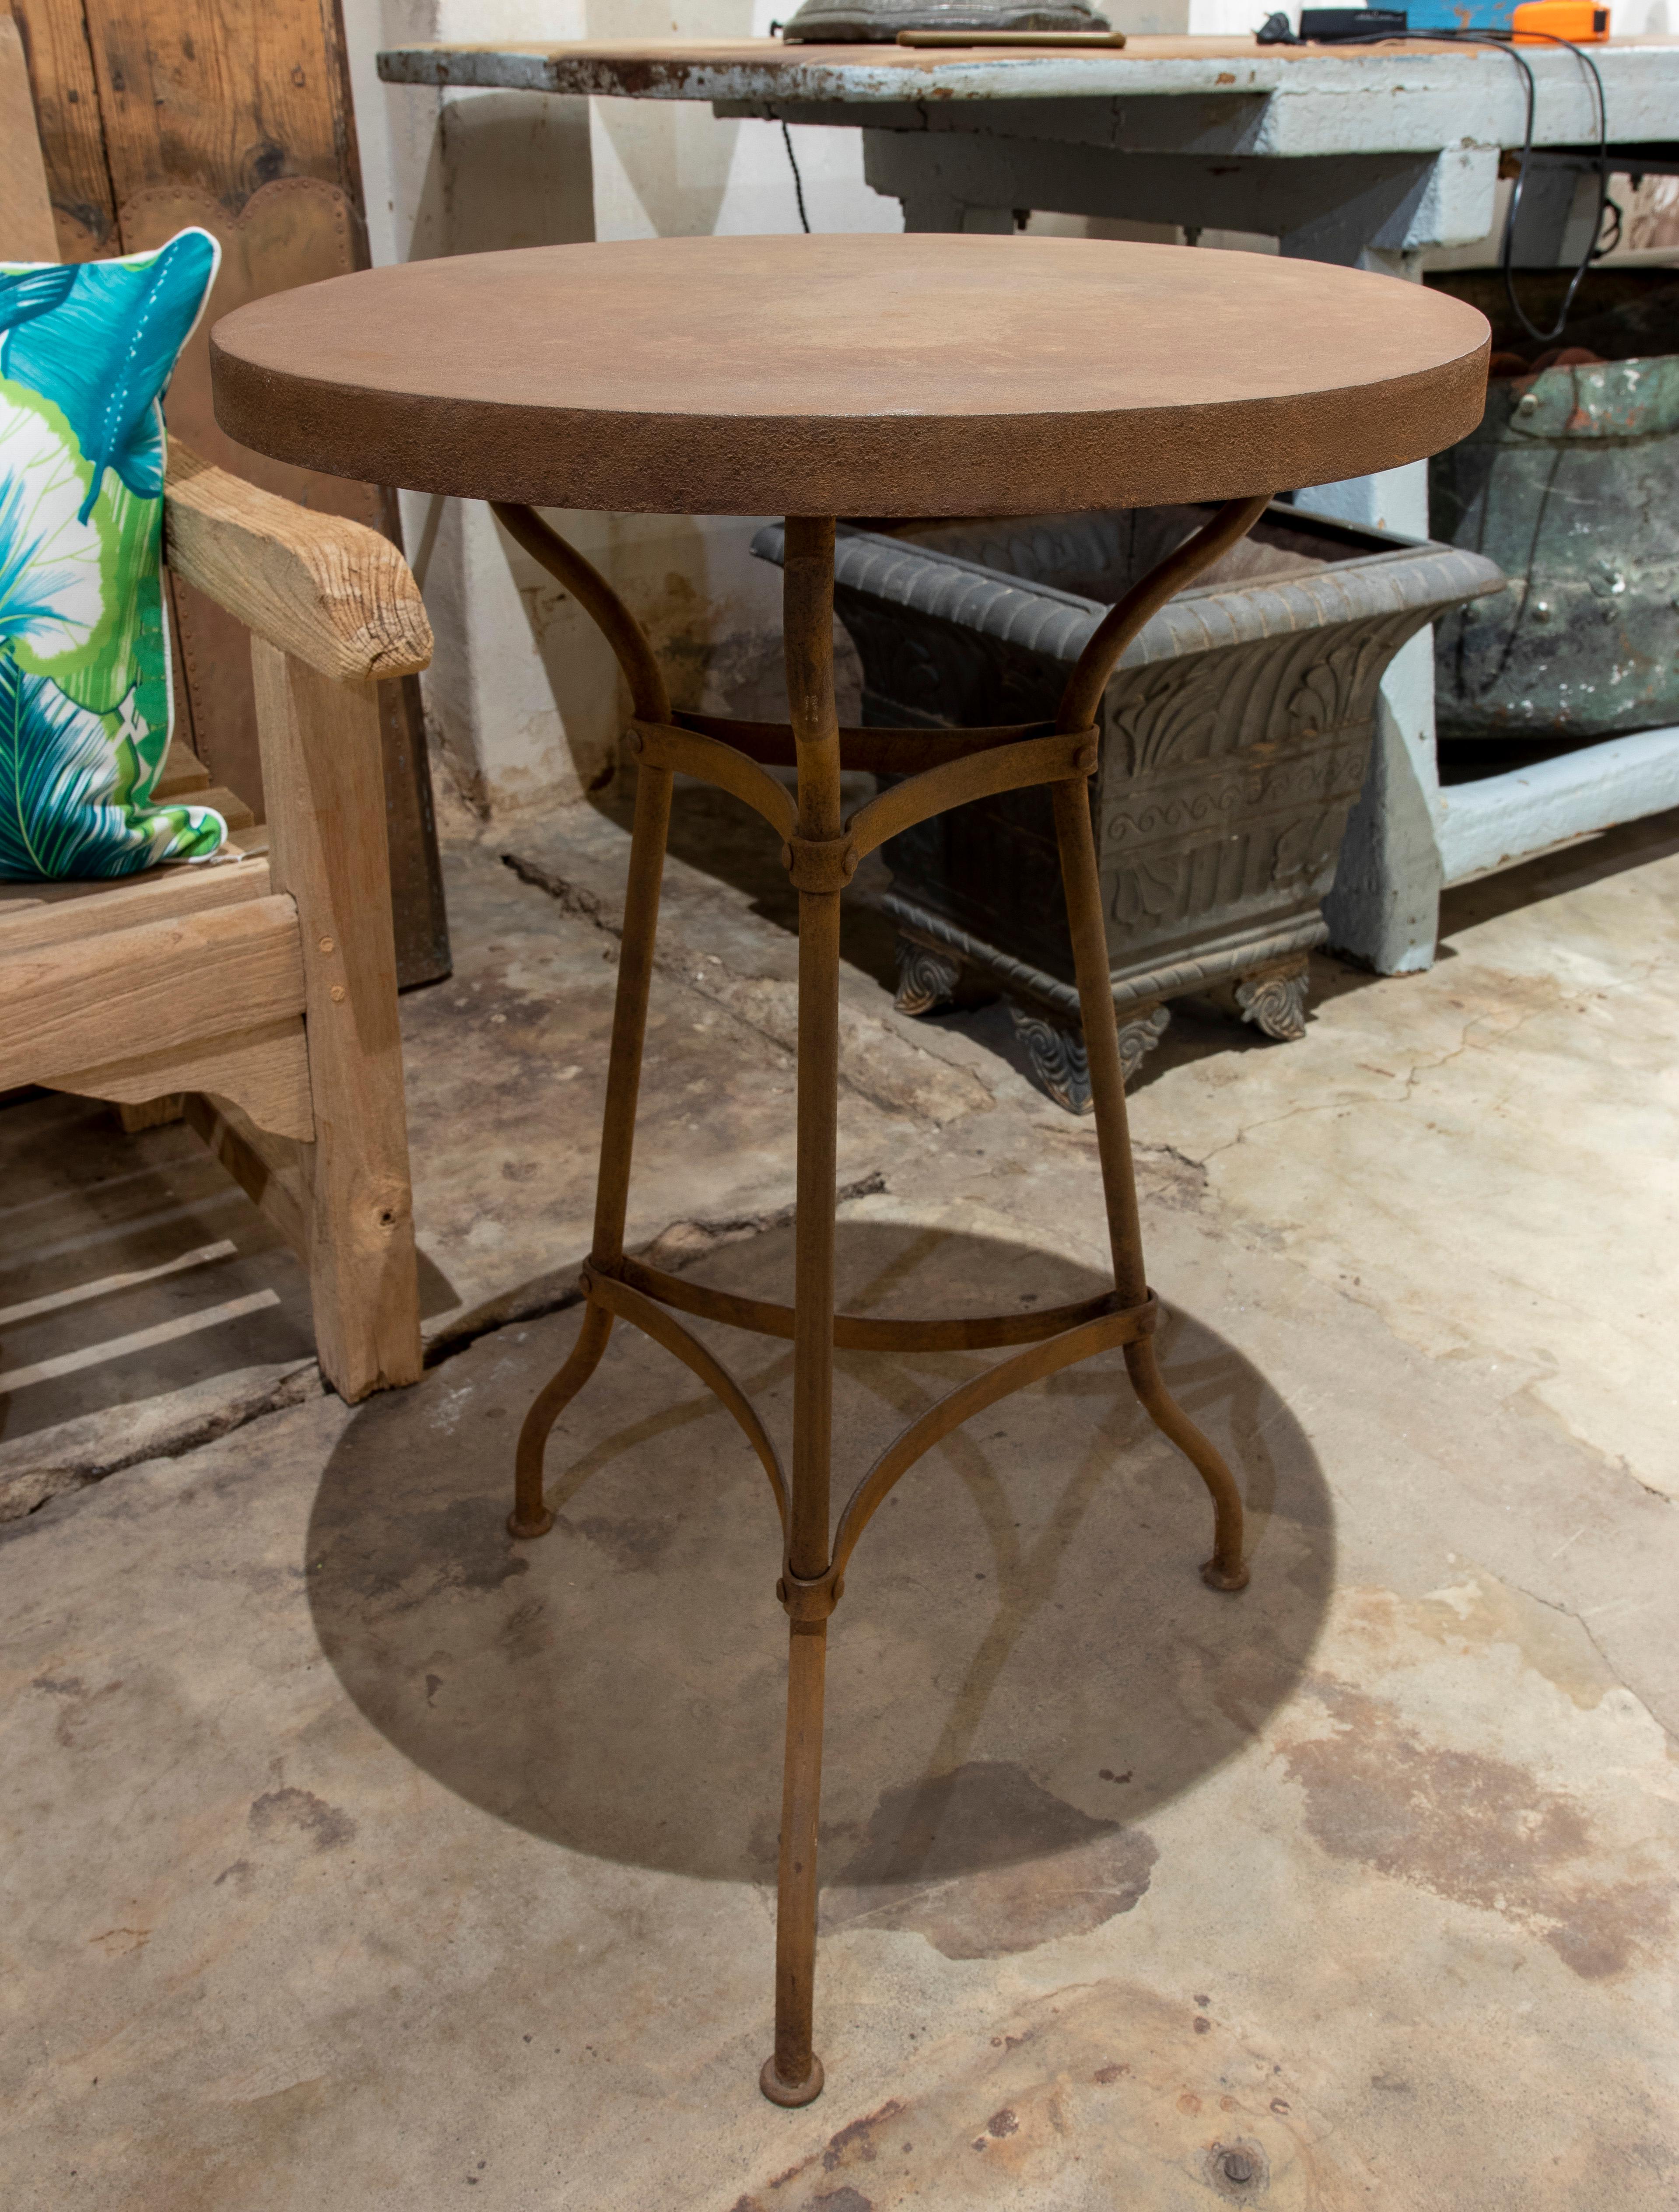 French iron table with round top and three legs for the garden.